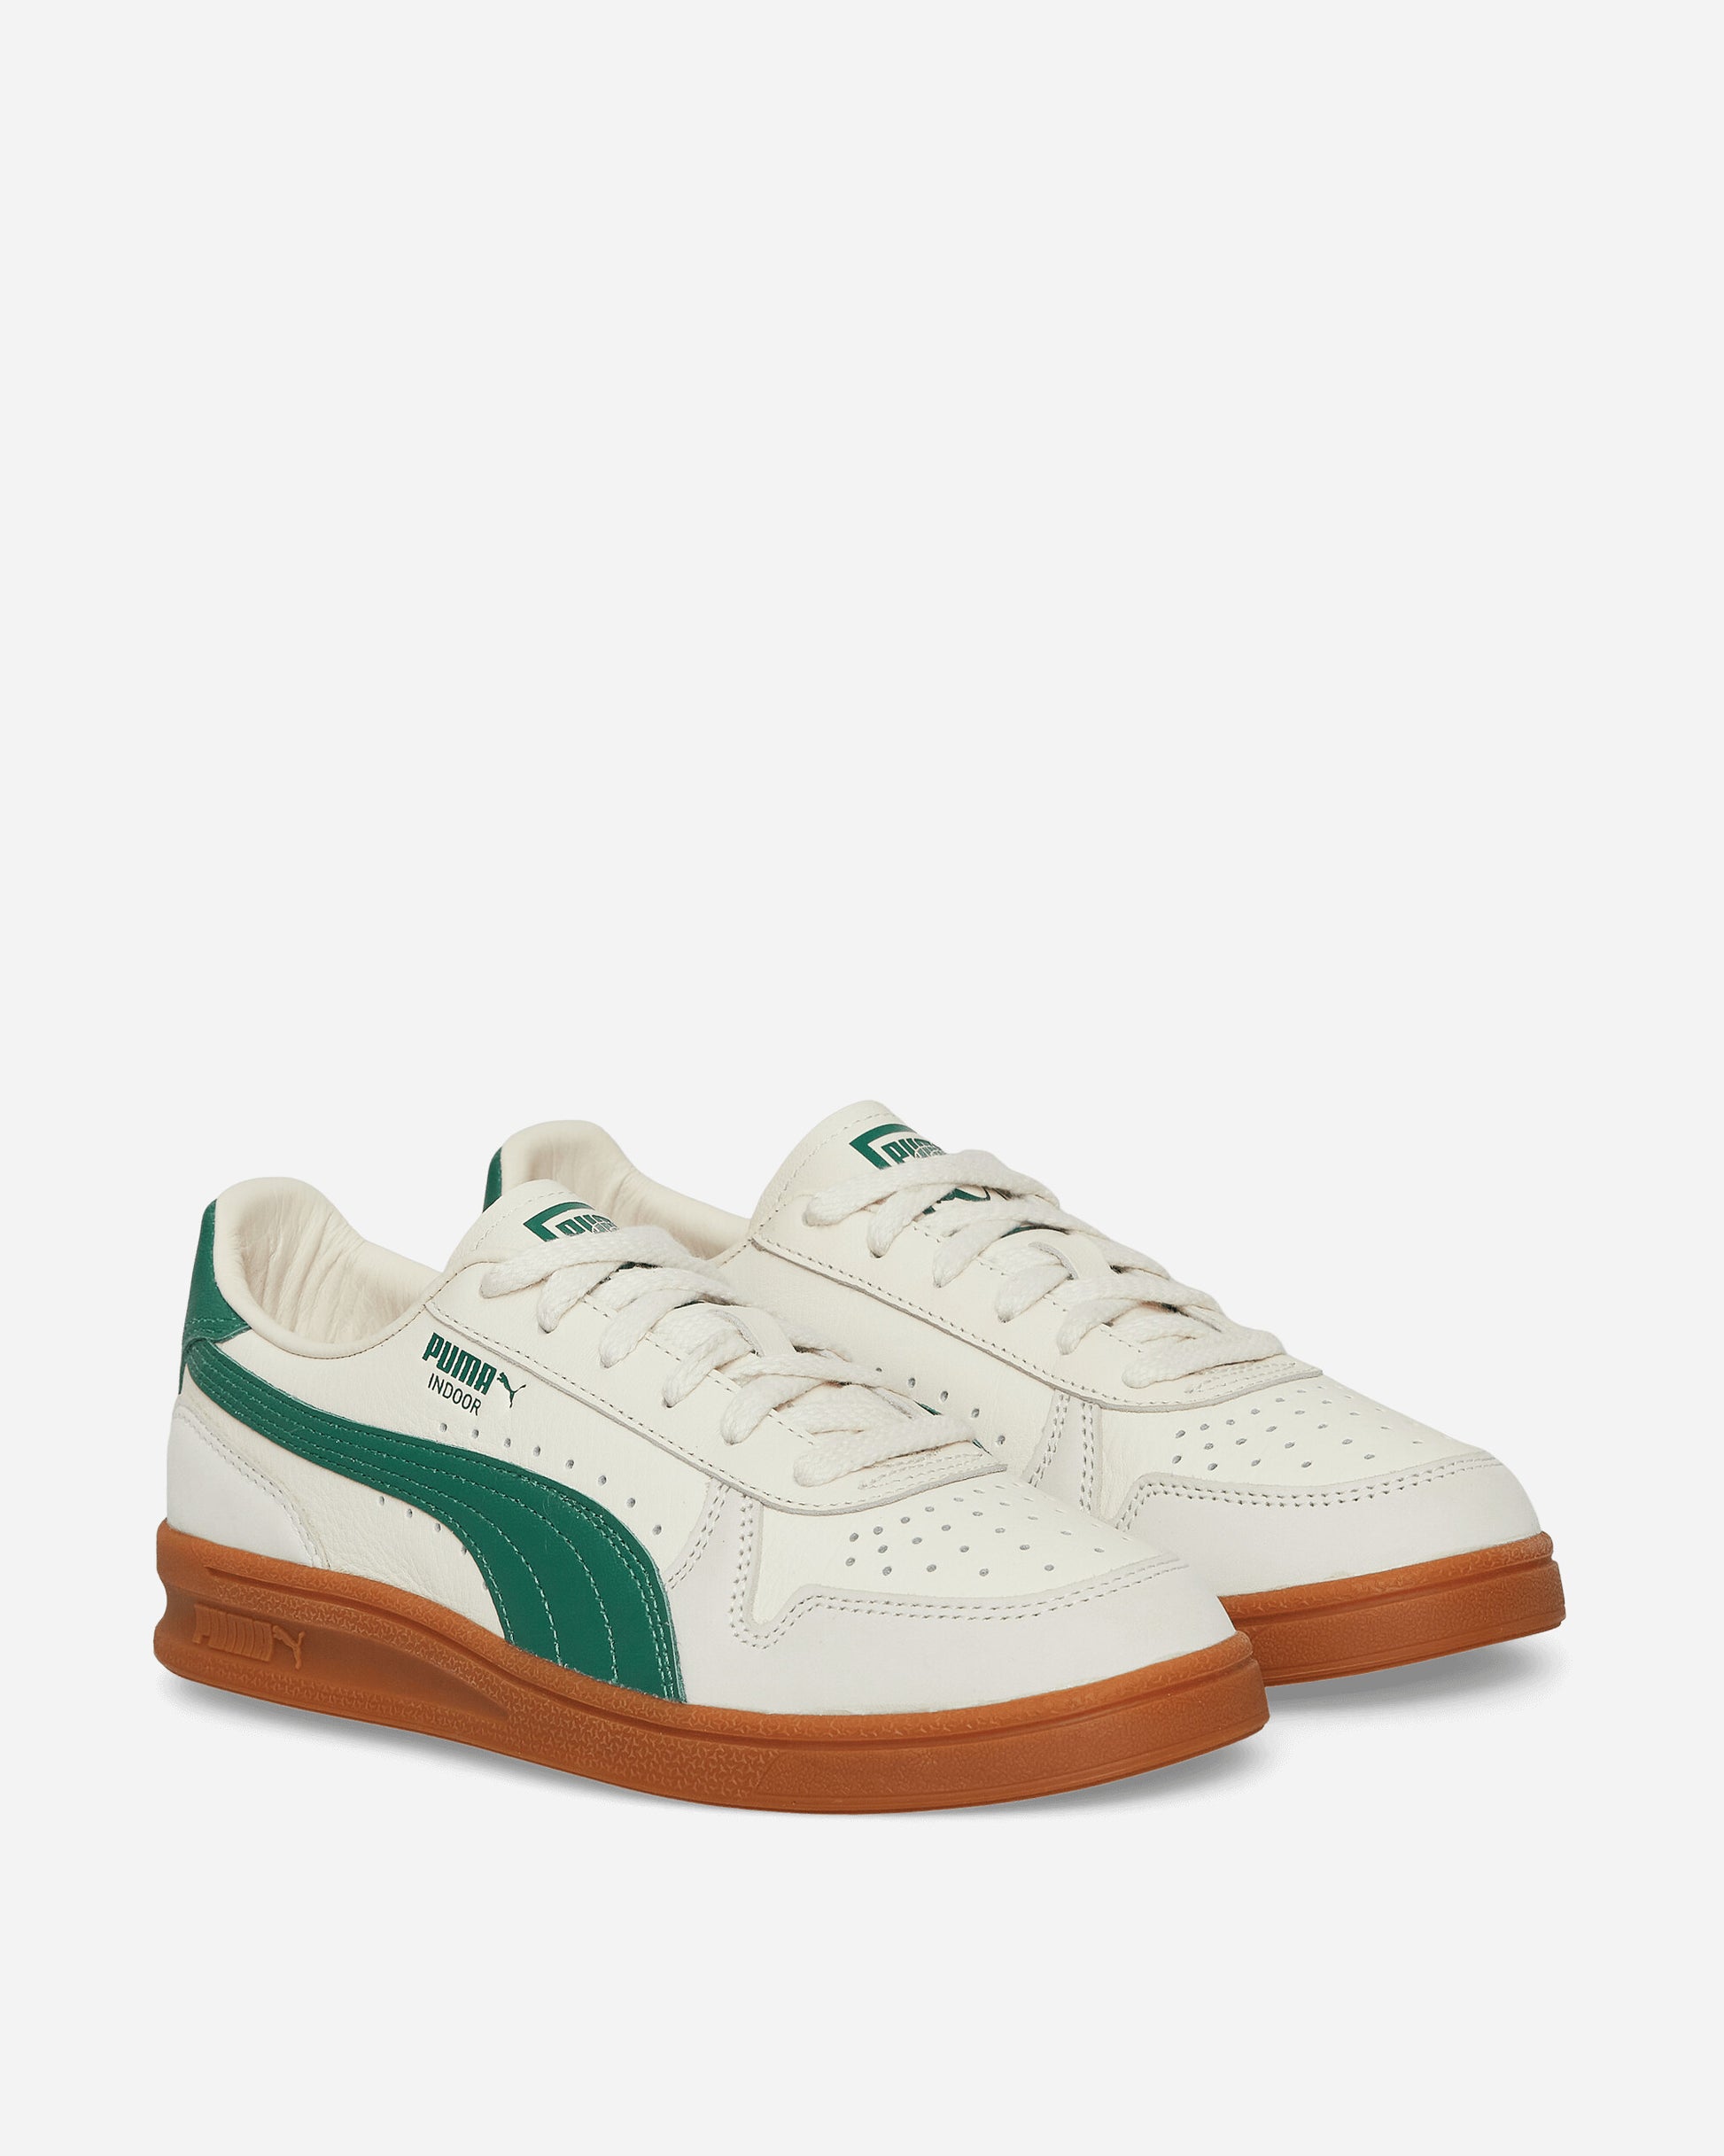 Puma Indoor Og Frosted Ivory/Vine Sneakers Low 395363-02